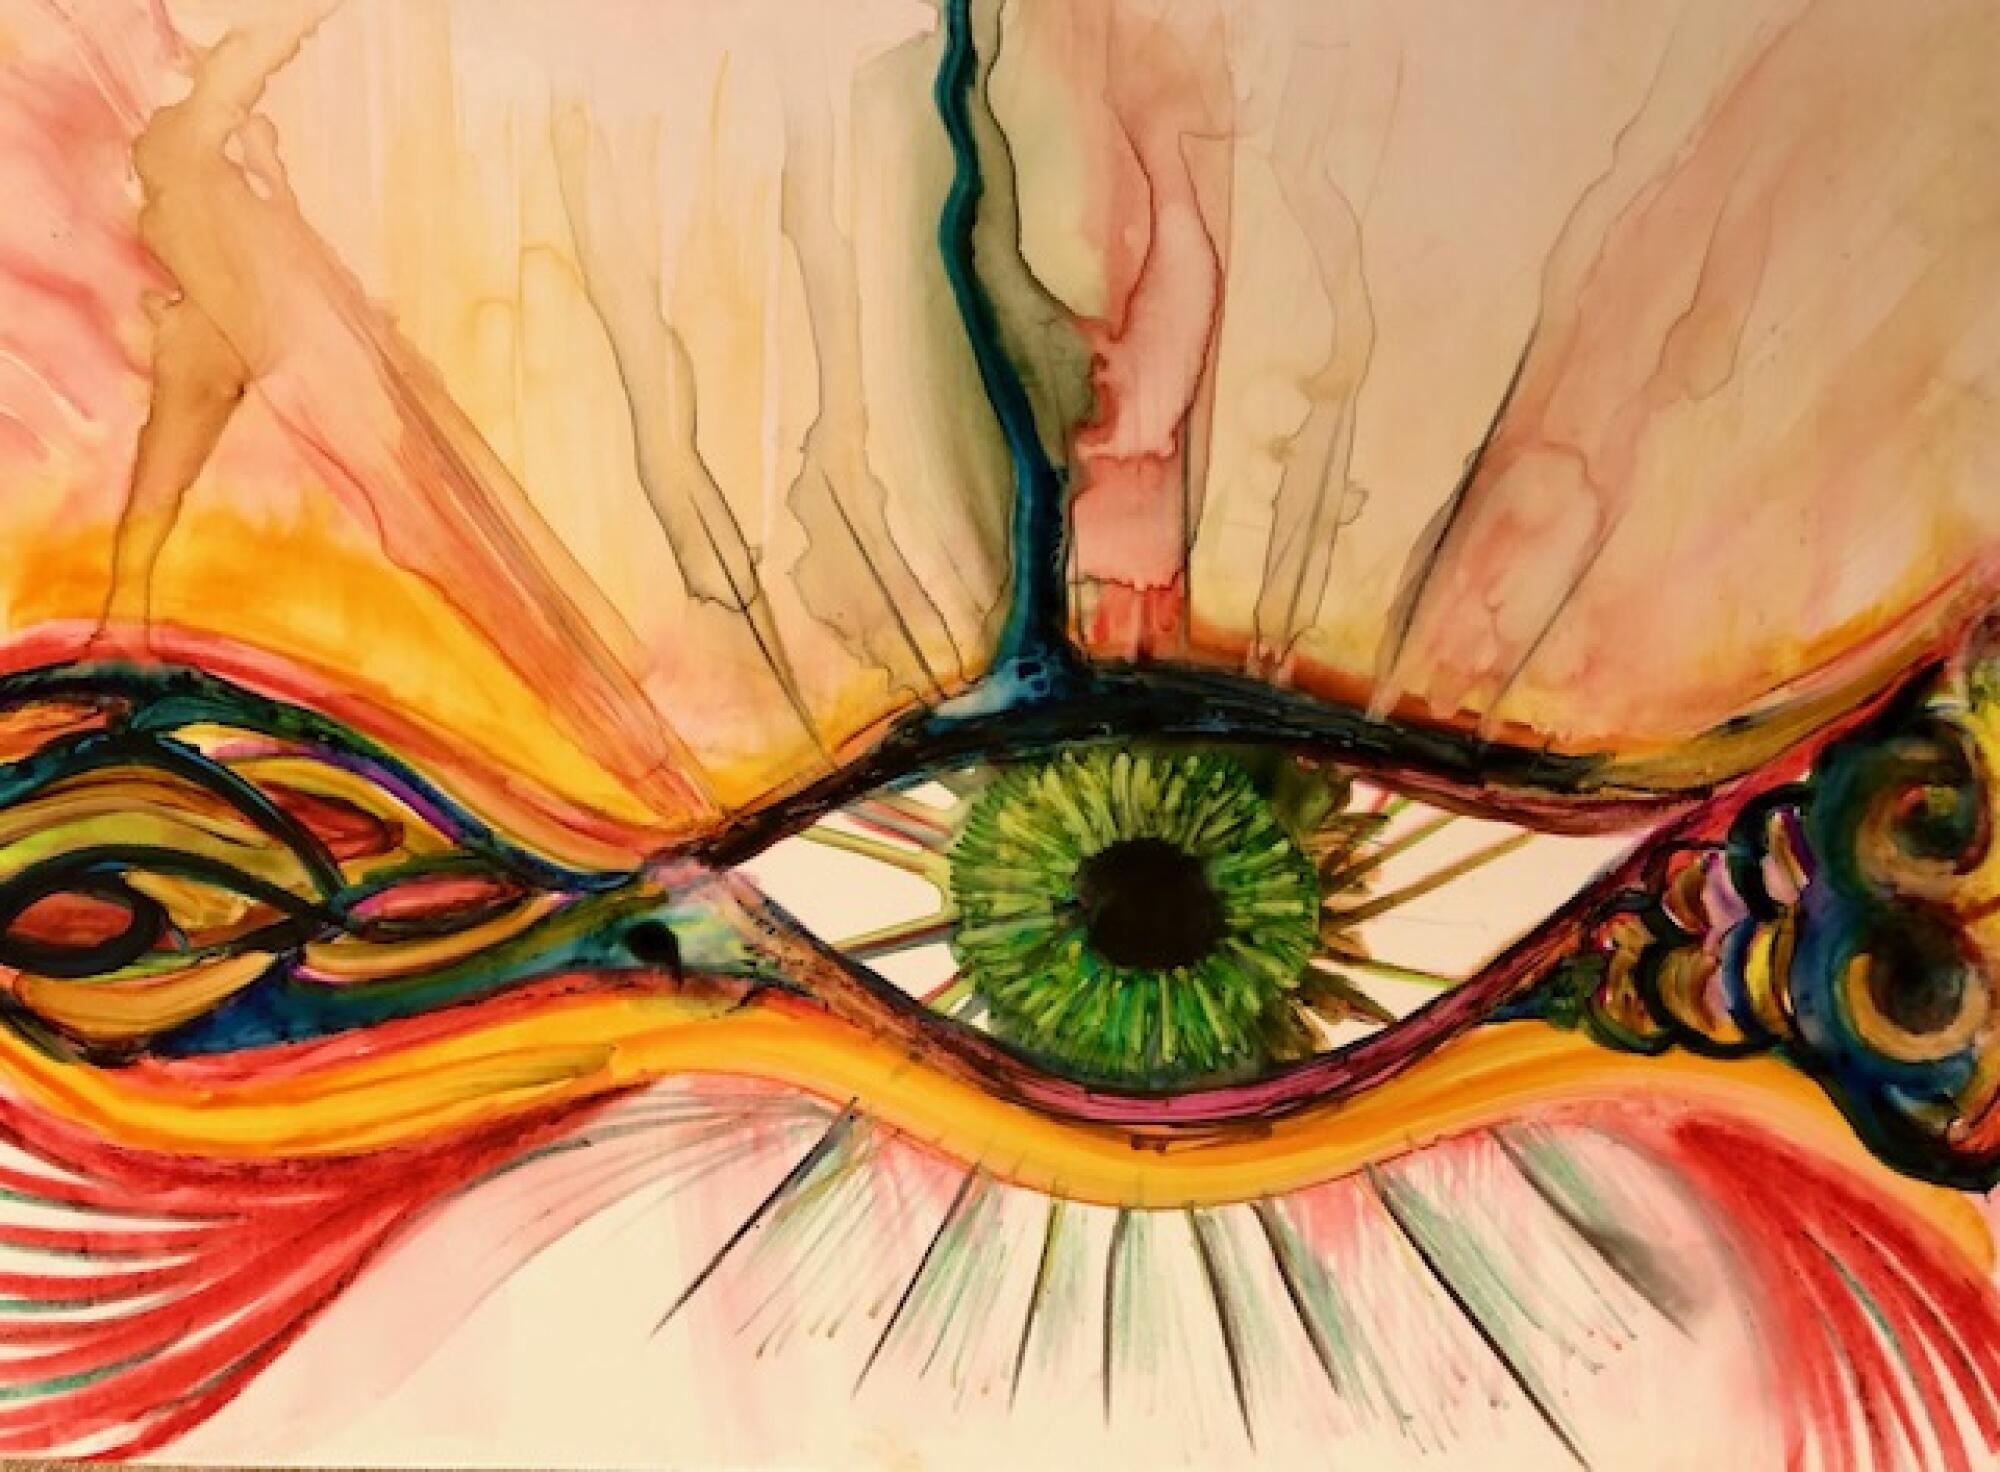 An art work with a green eye at the center